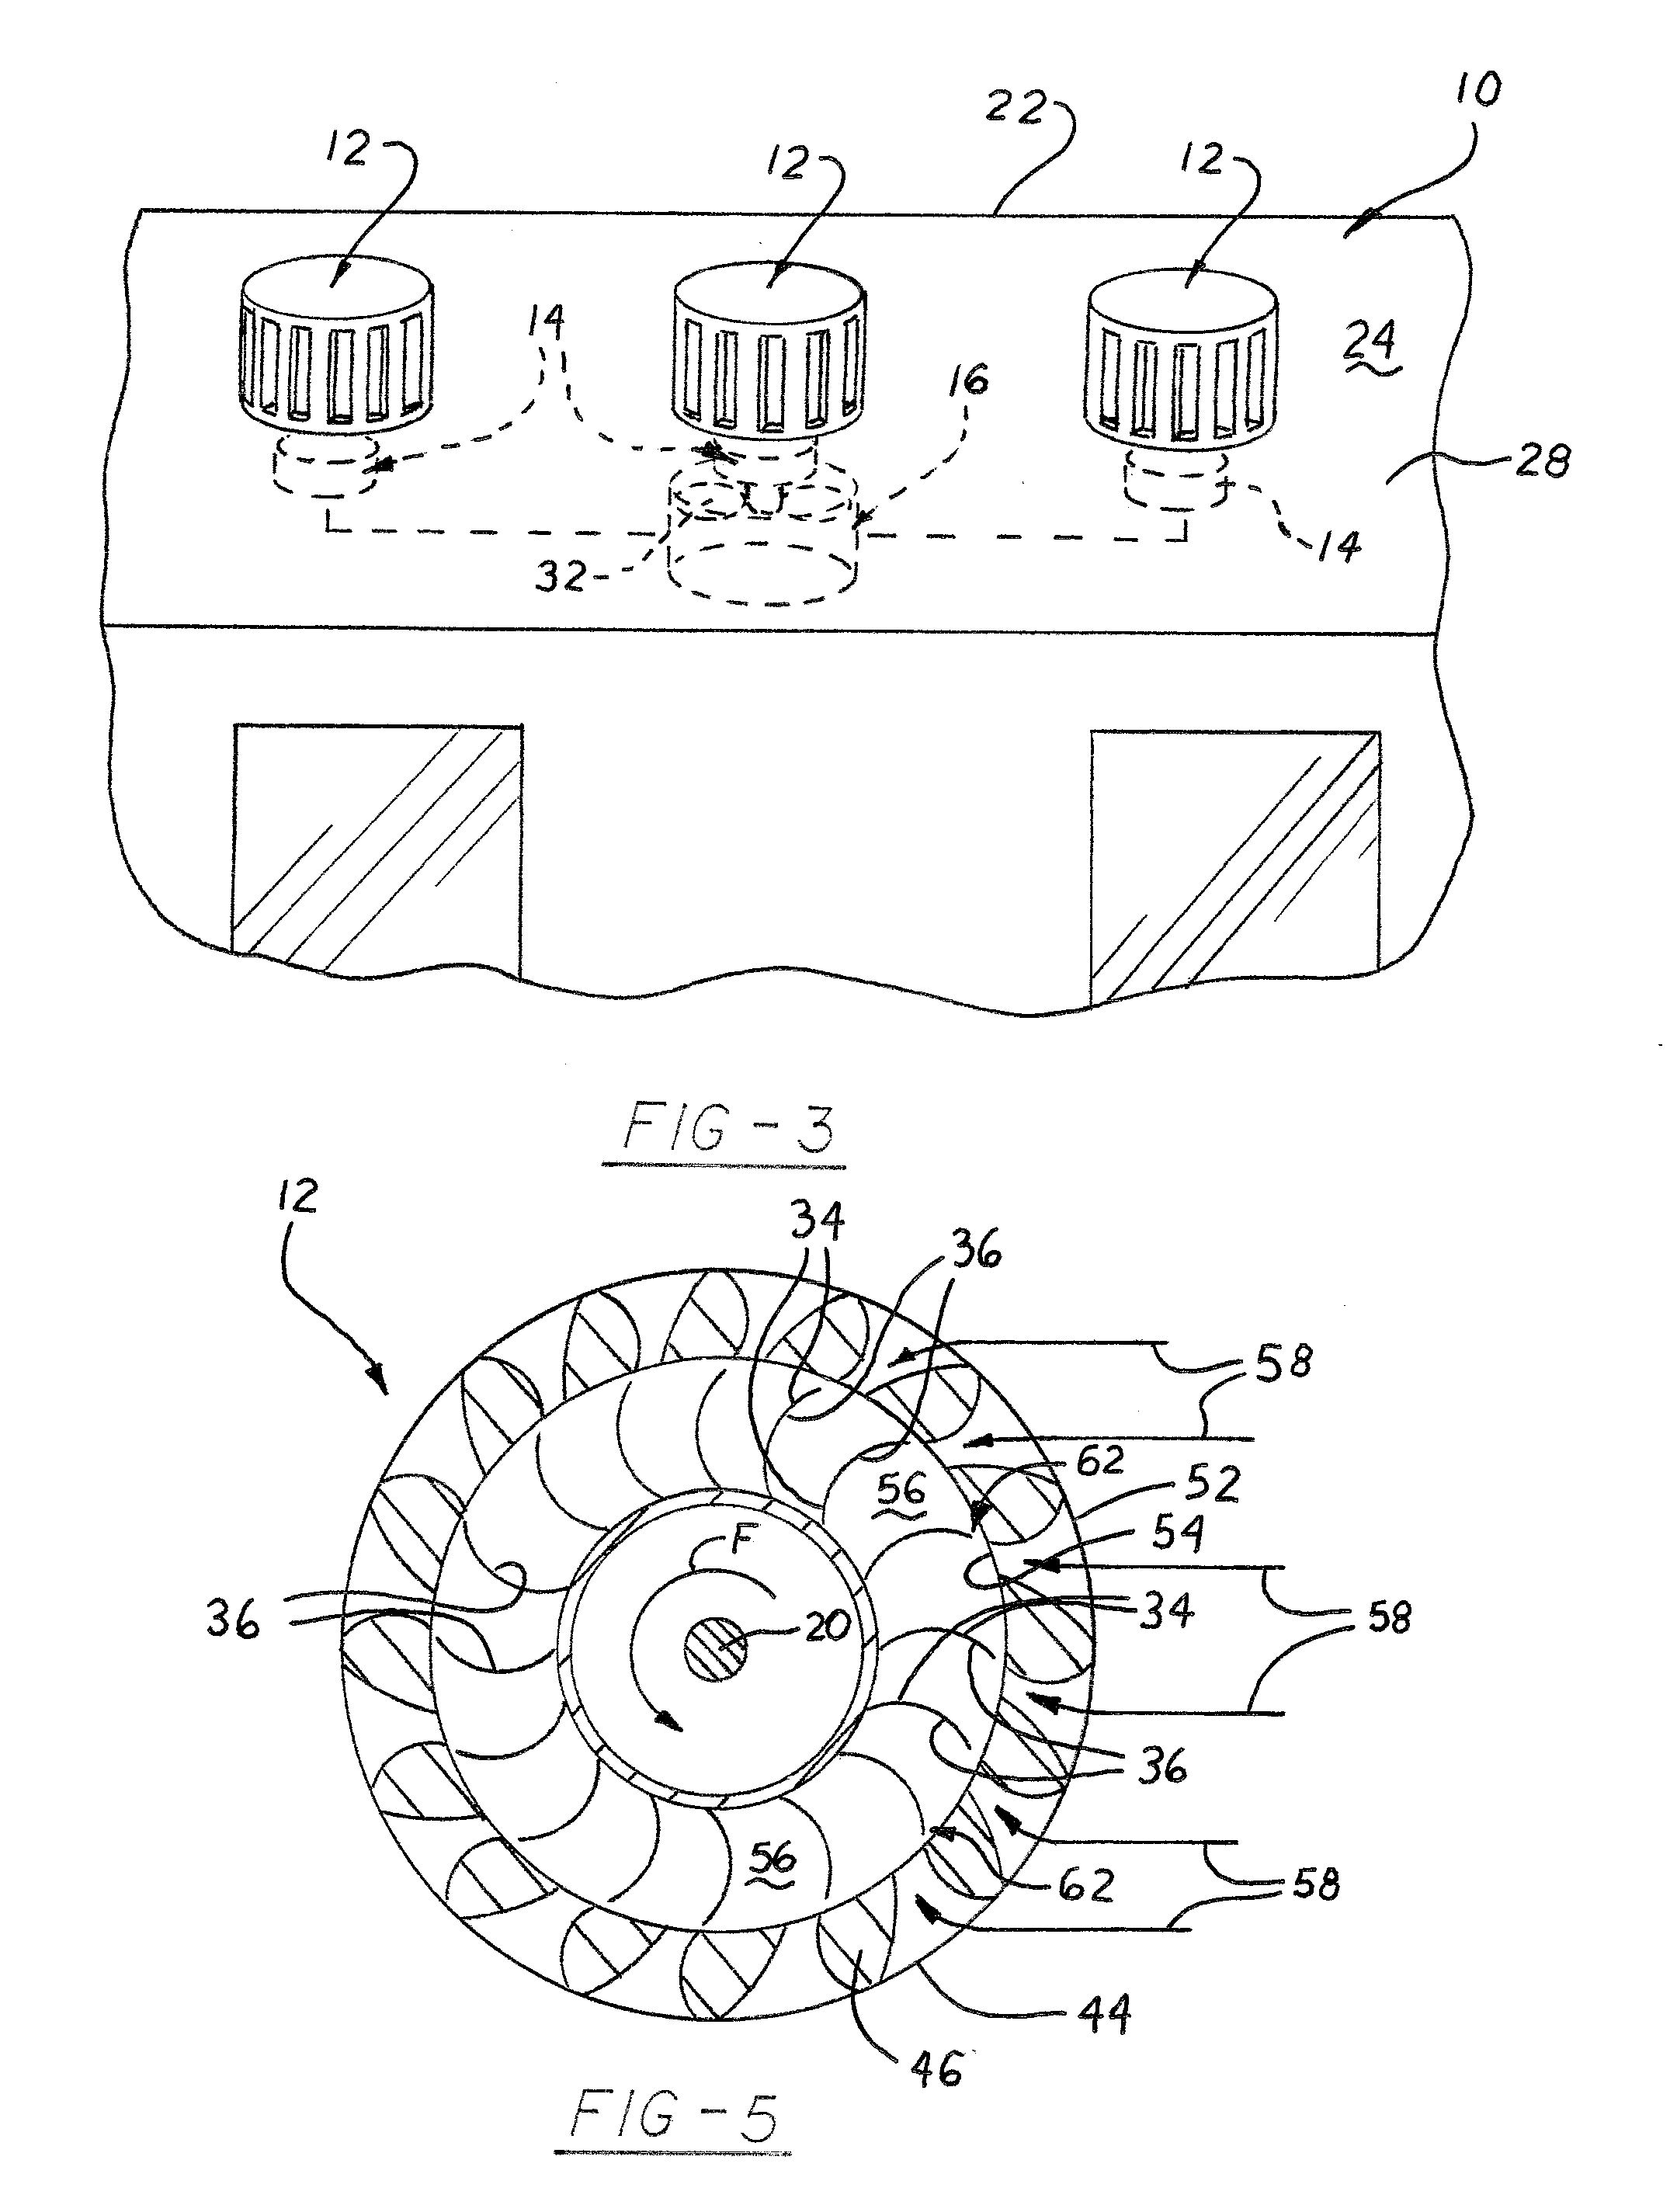 Wind powered electric furnace